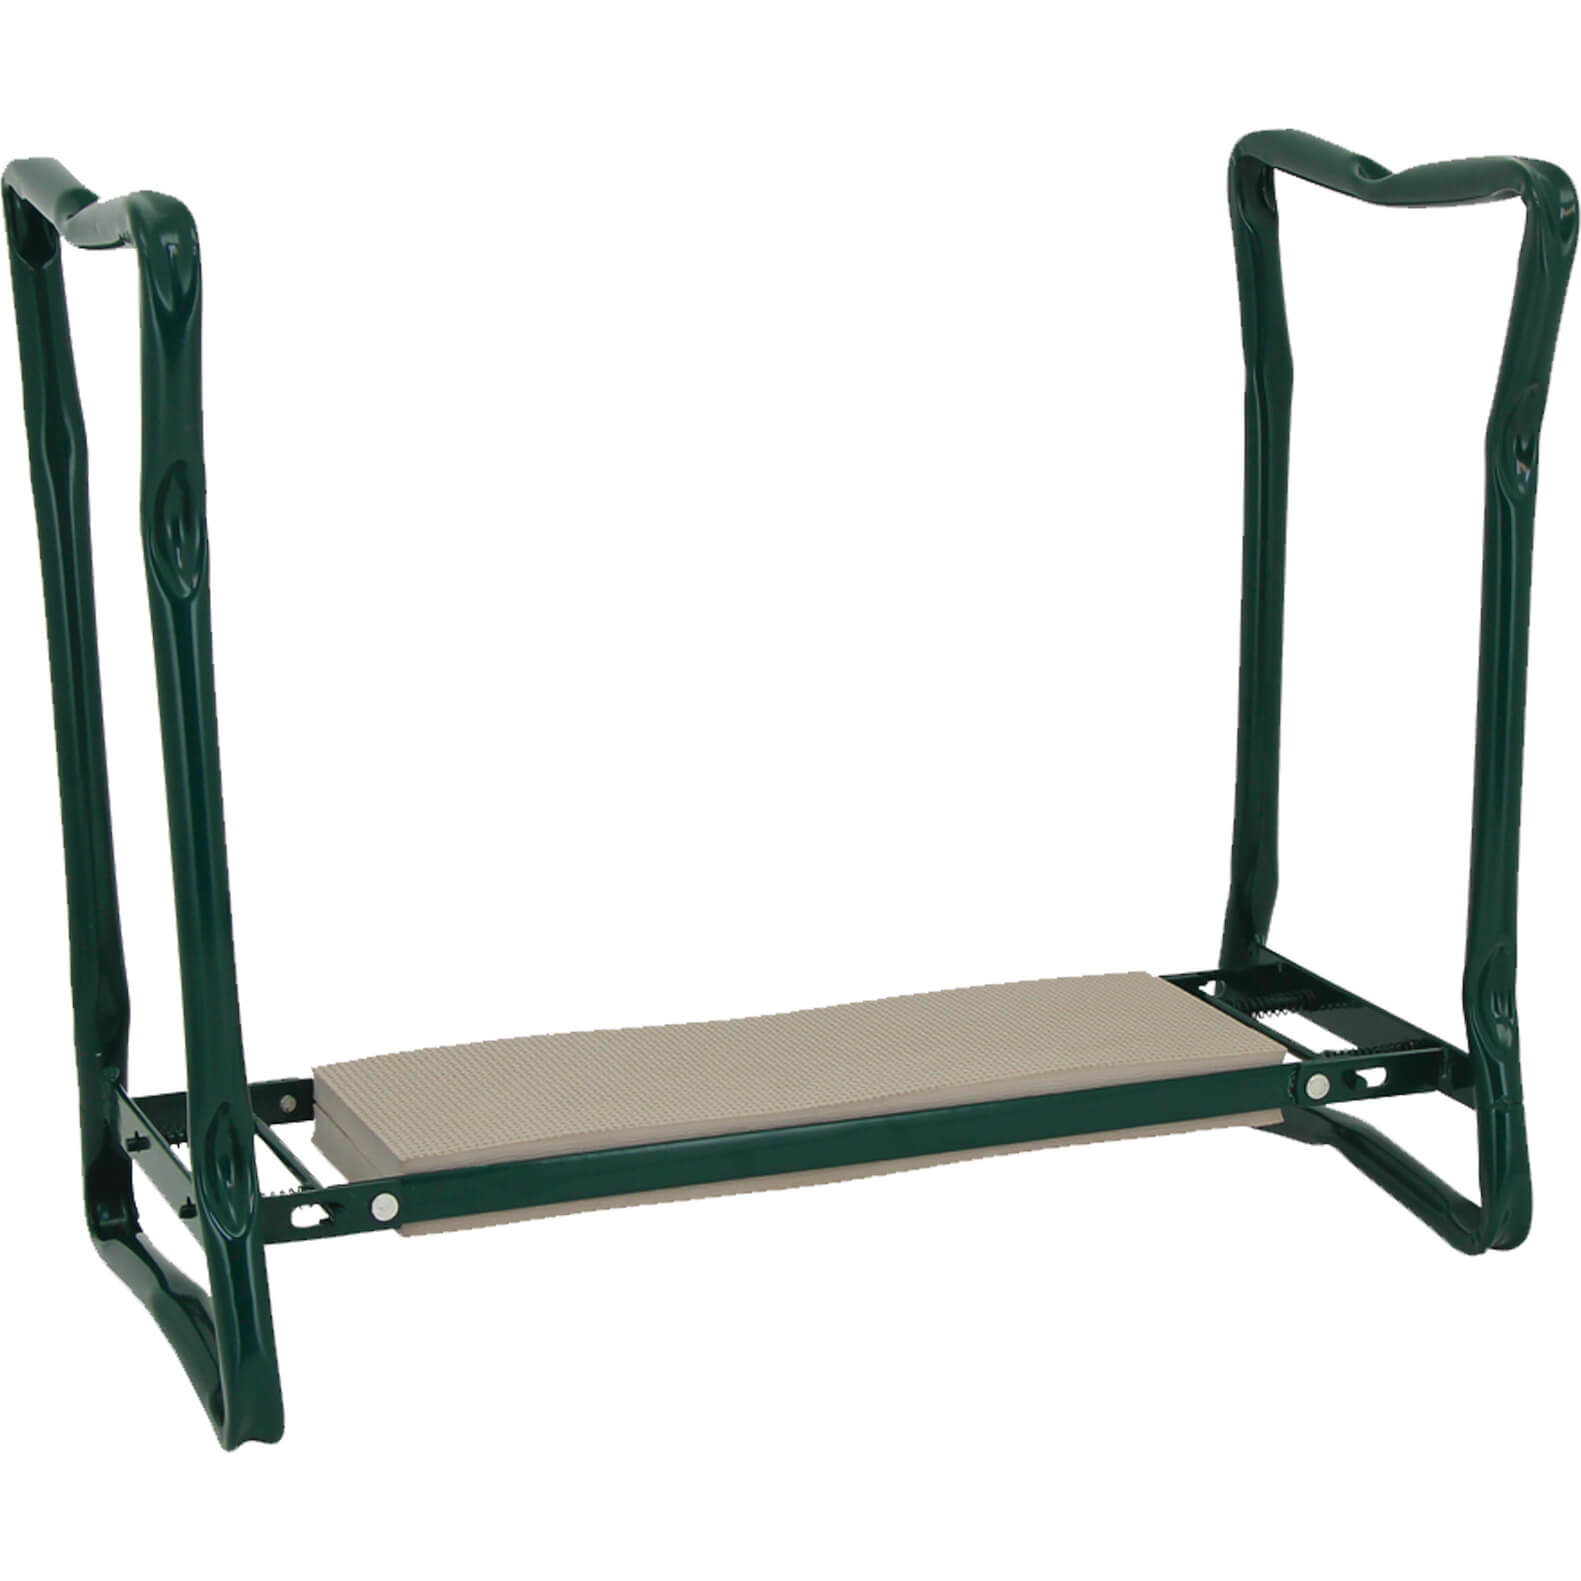 Town and Country 2 in 1 Garden Kneeler and Seat